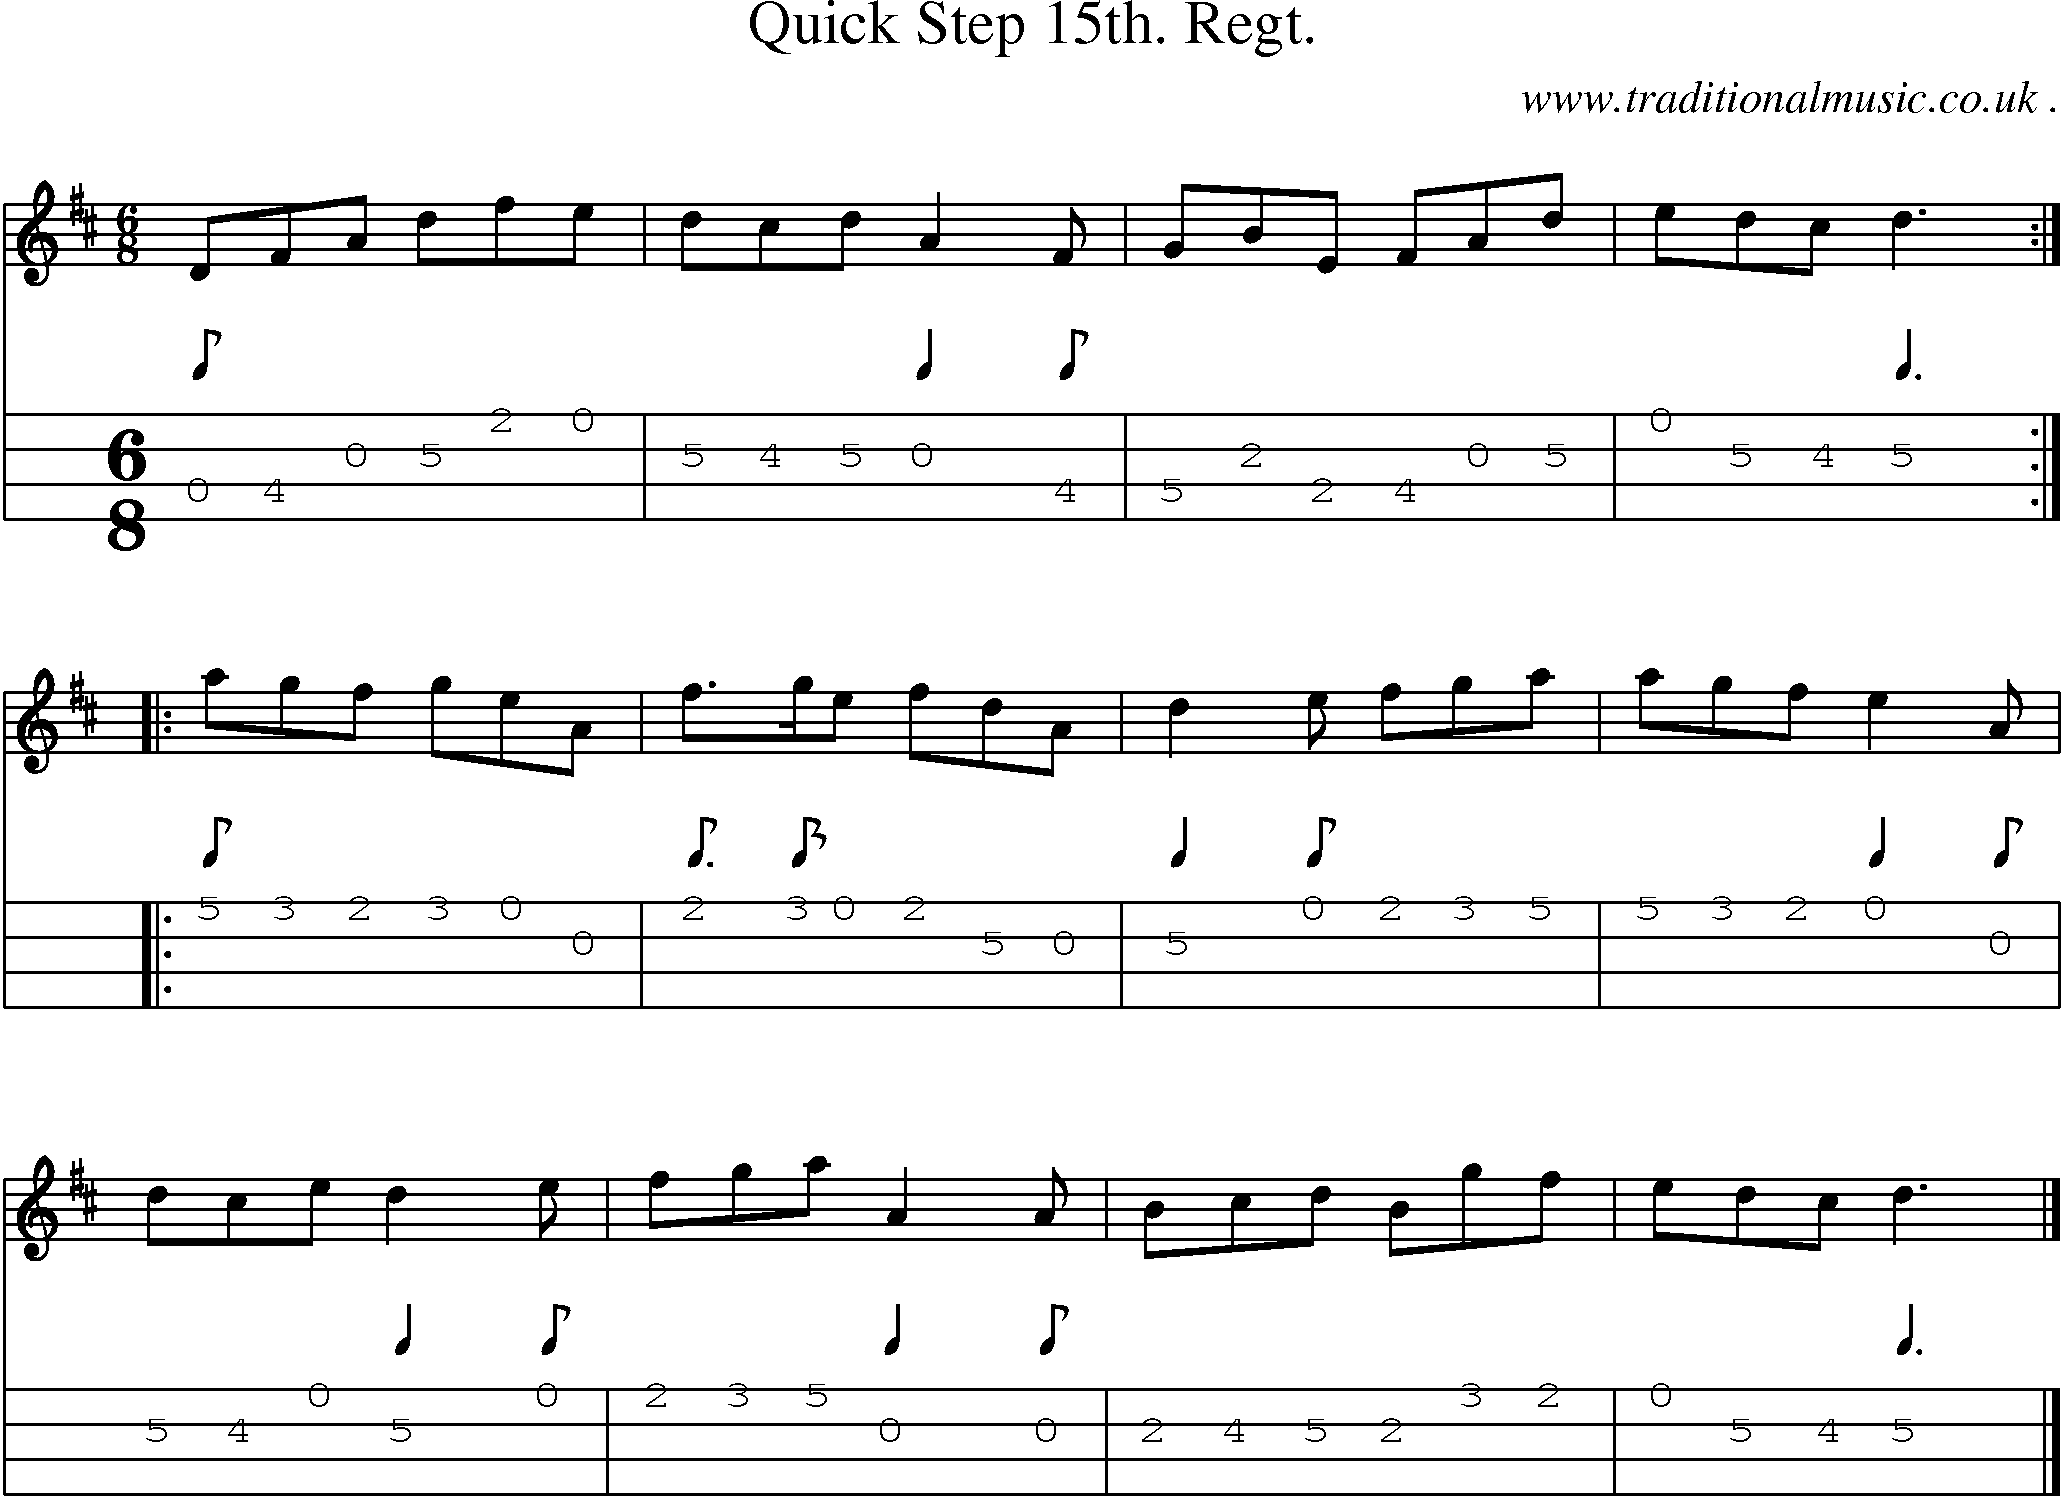 Sheet-music  score, Chords and Mandolin Tabs for Quick Step 15th Regt